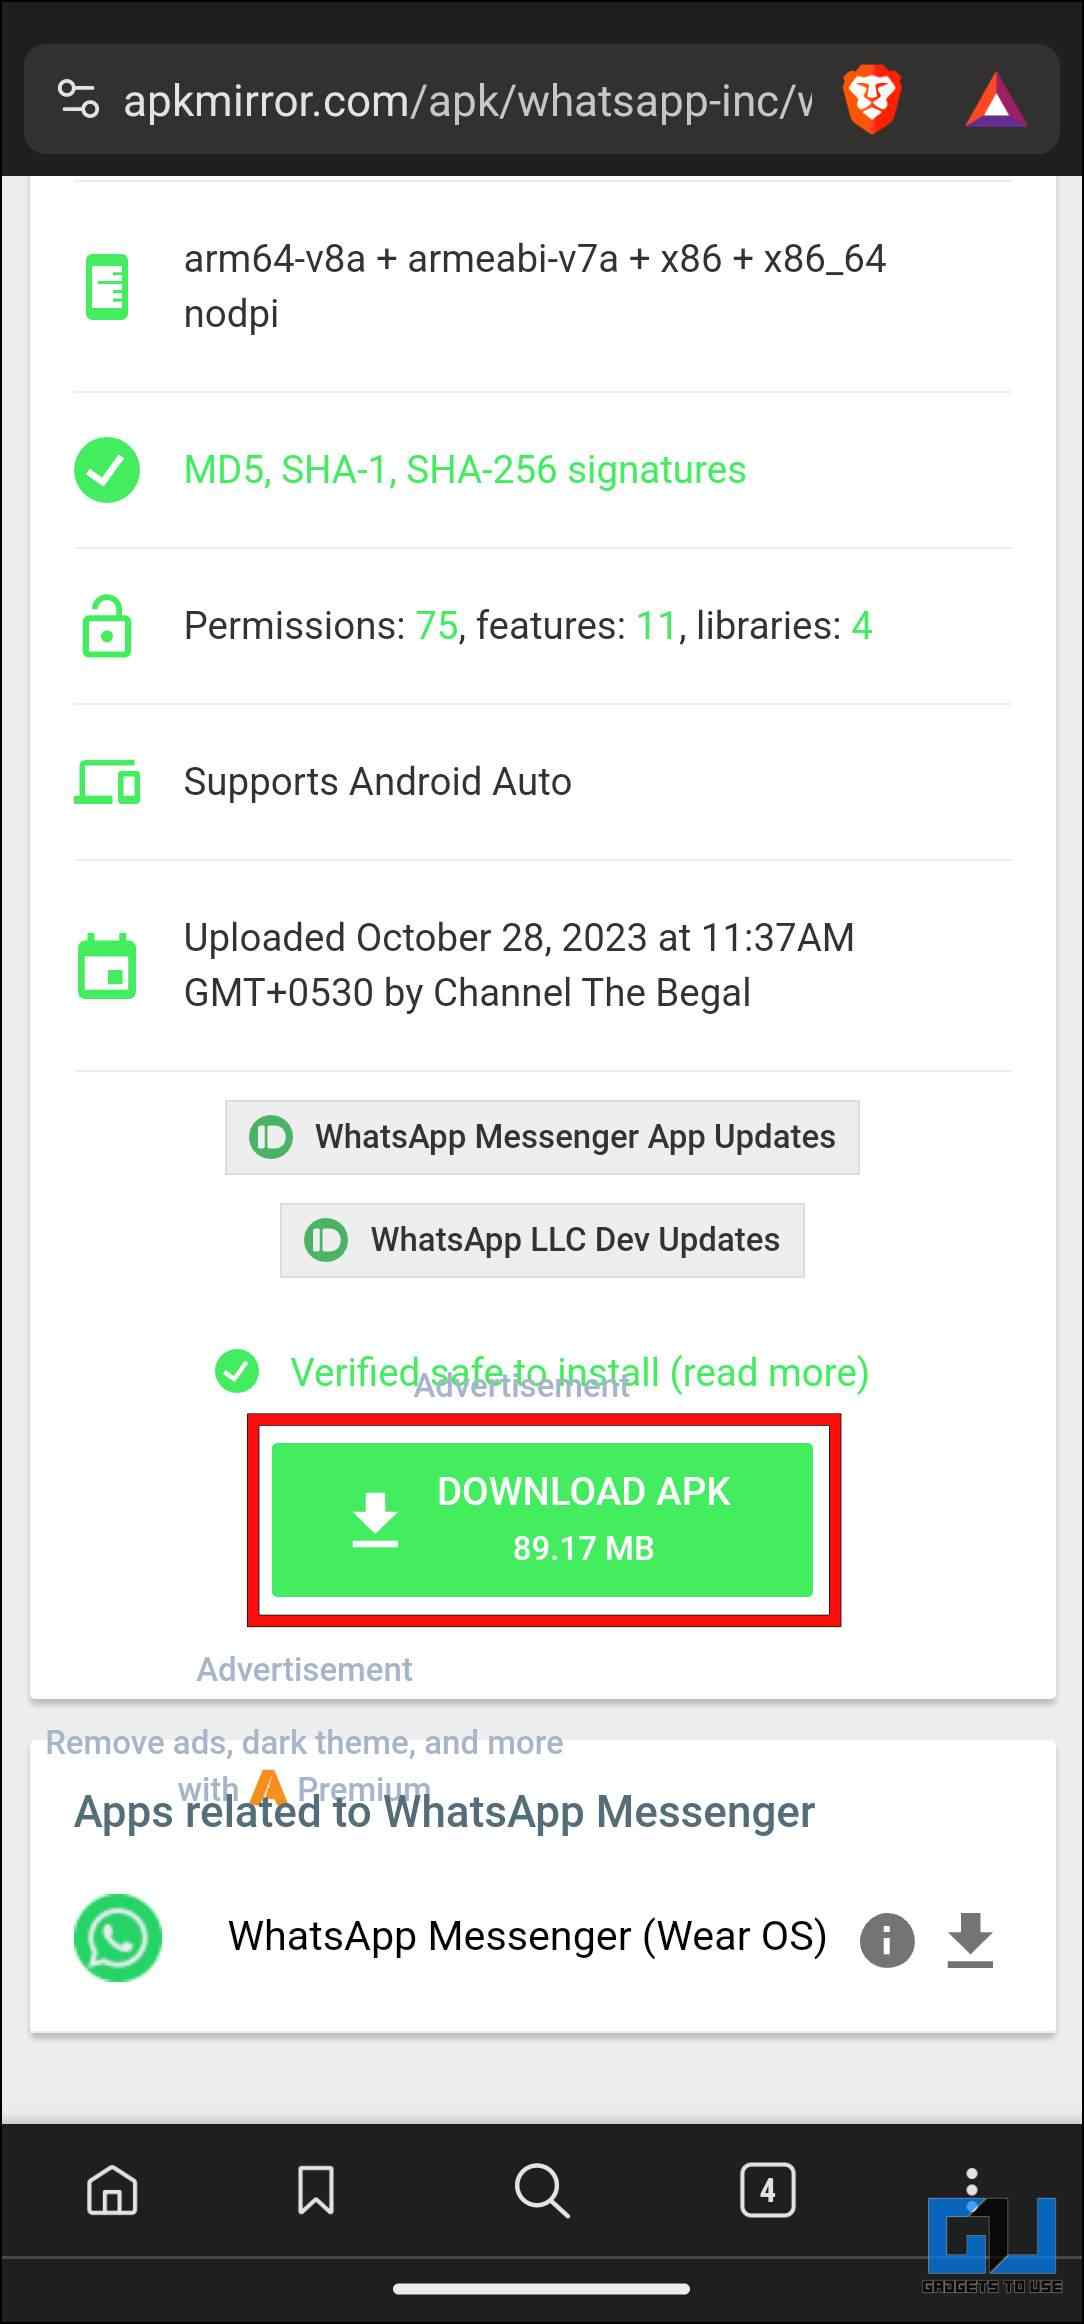 Download the Selected APK for WhatsApp